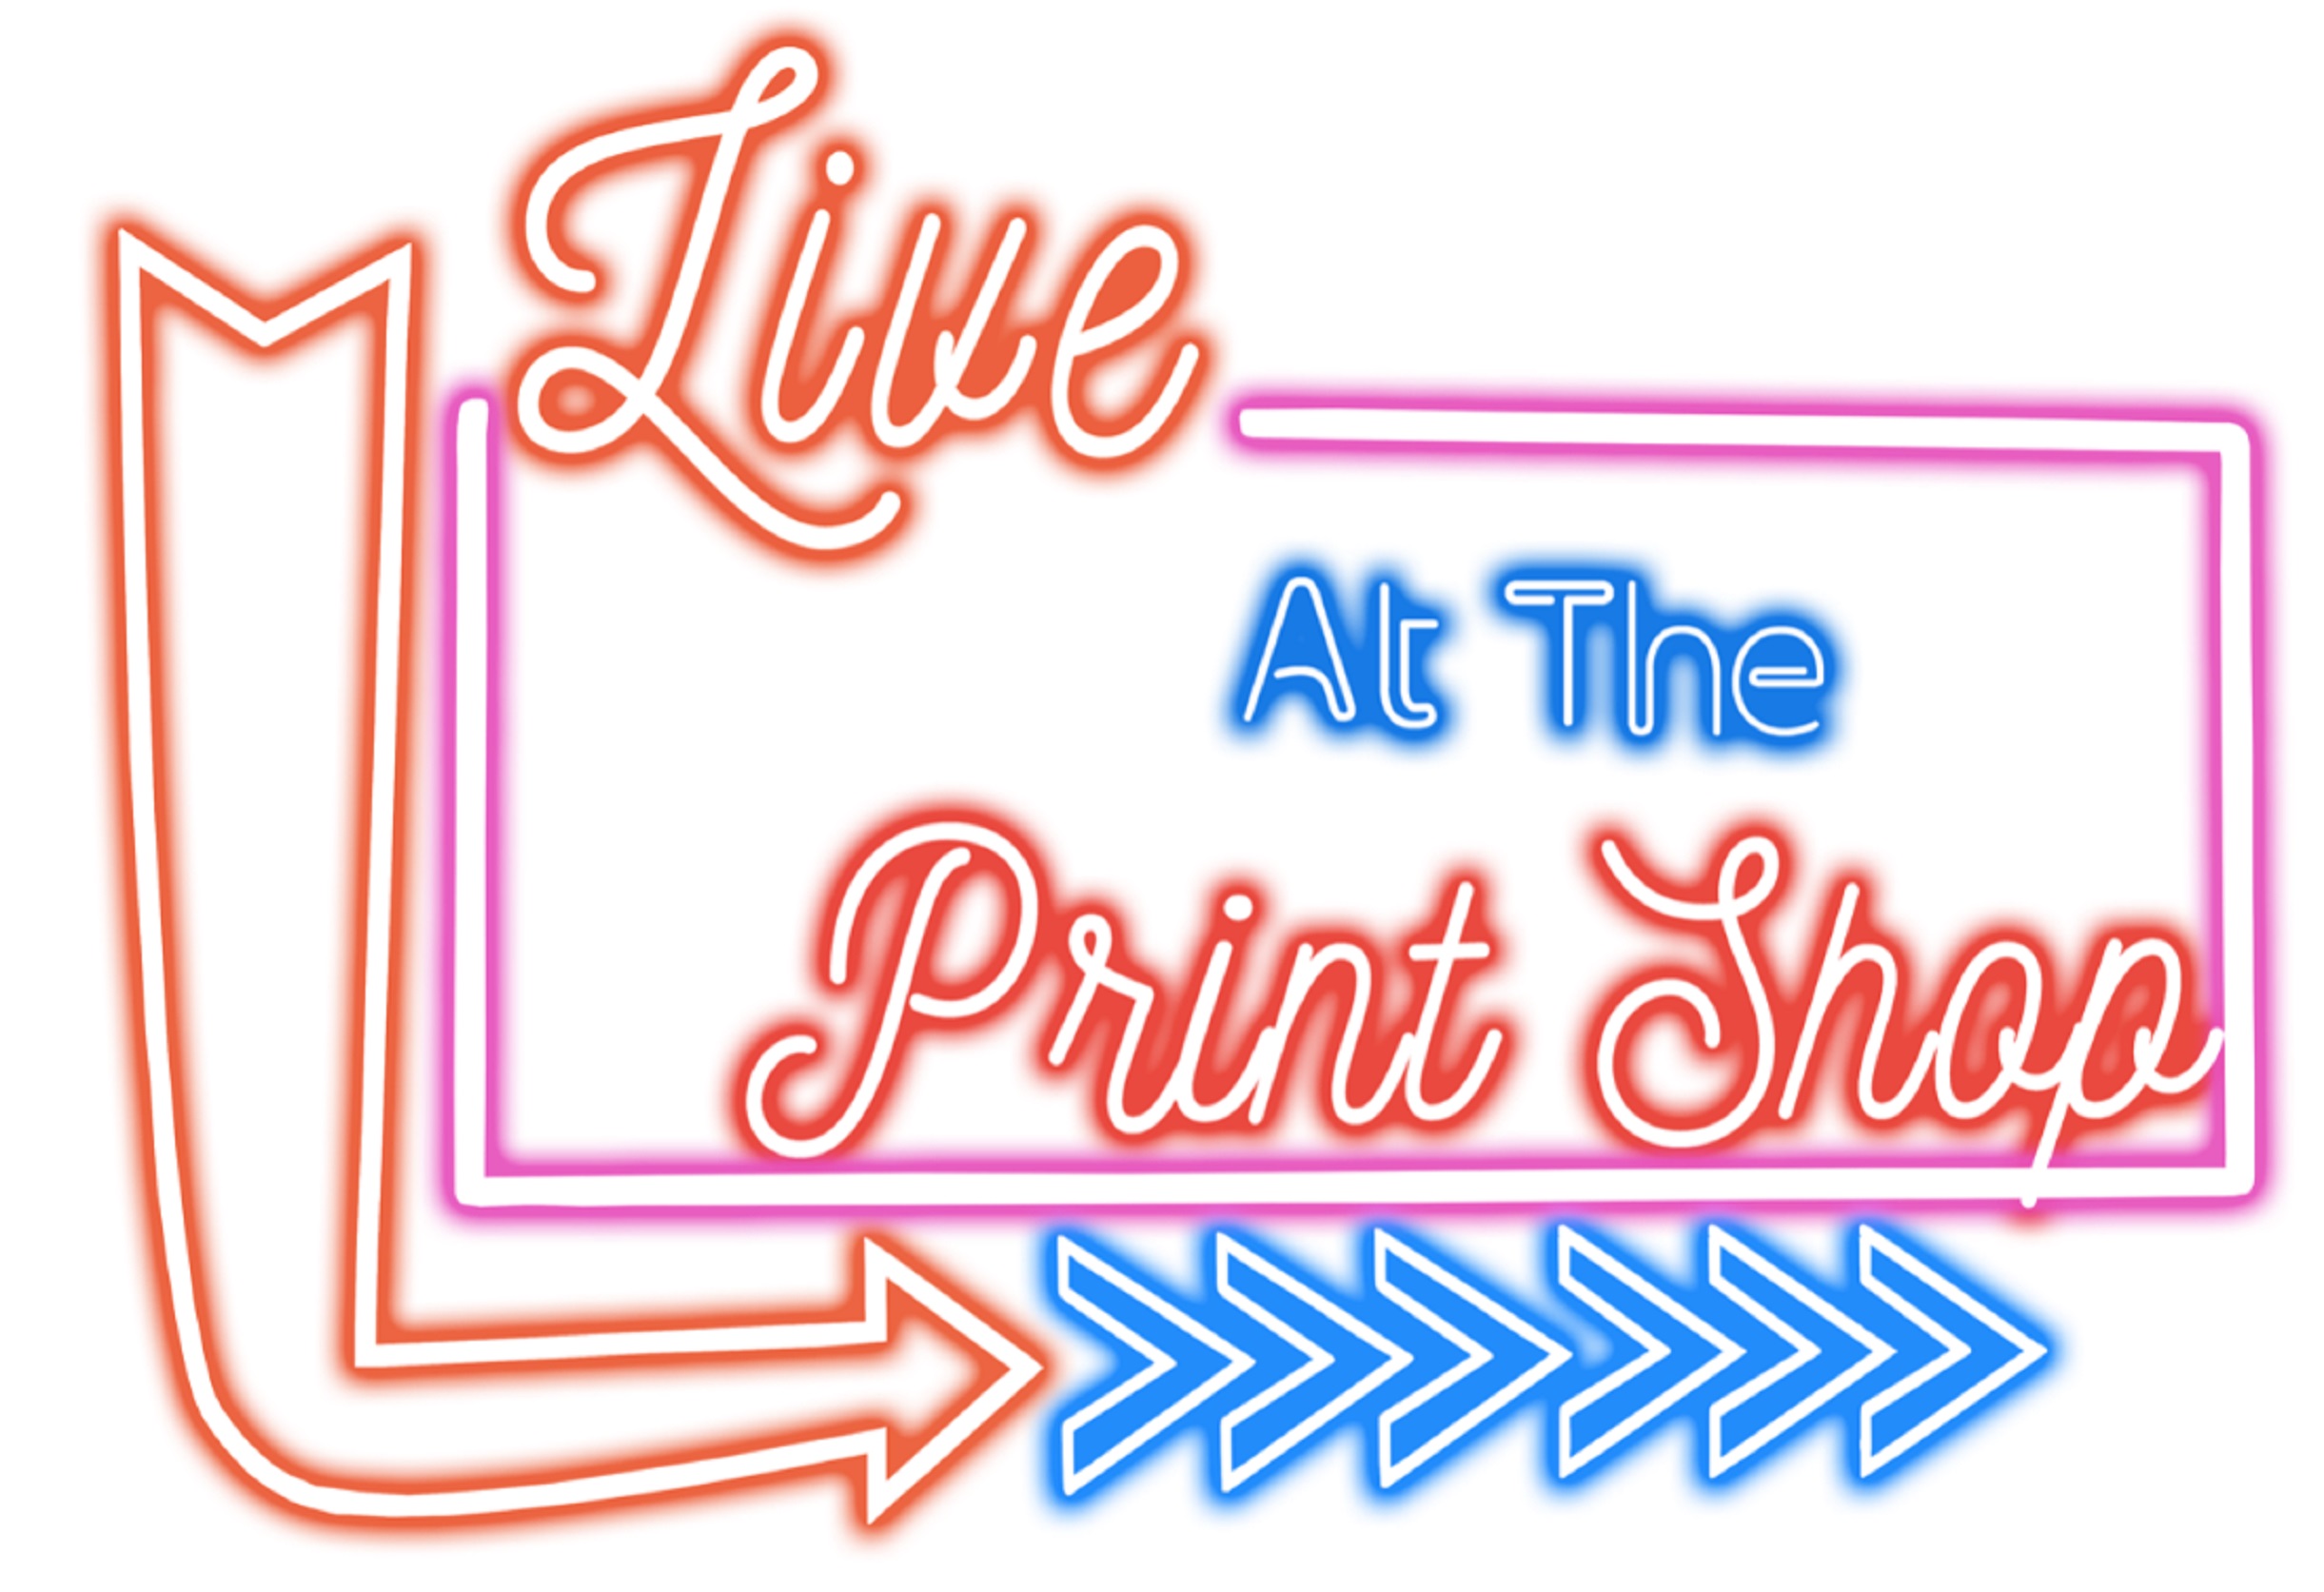 Skip Martin featured in new episode of 'Live At The Print Shop'